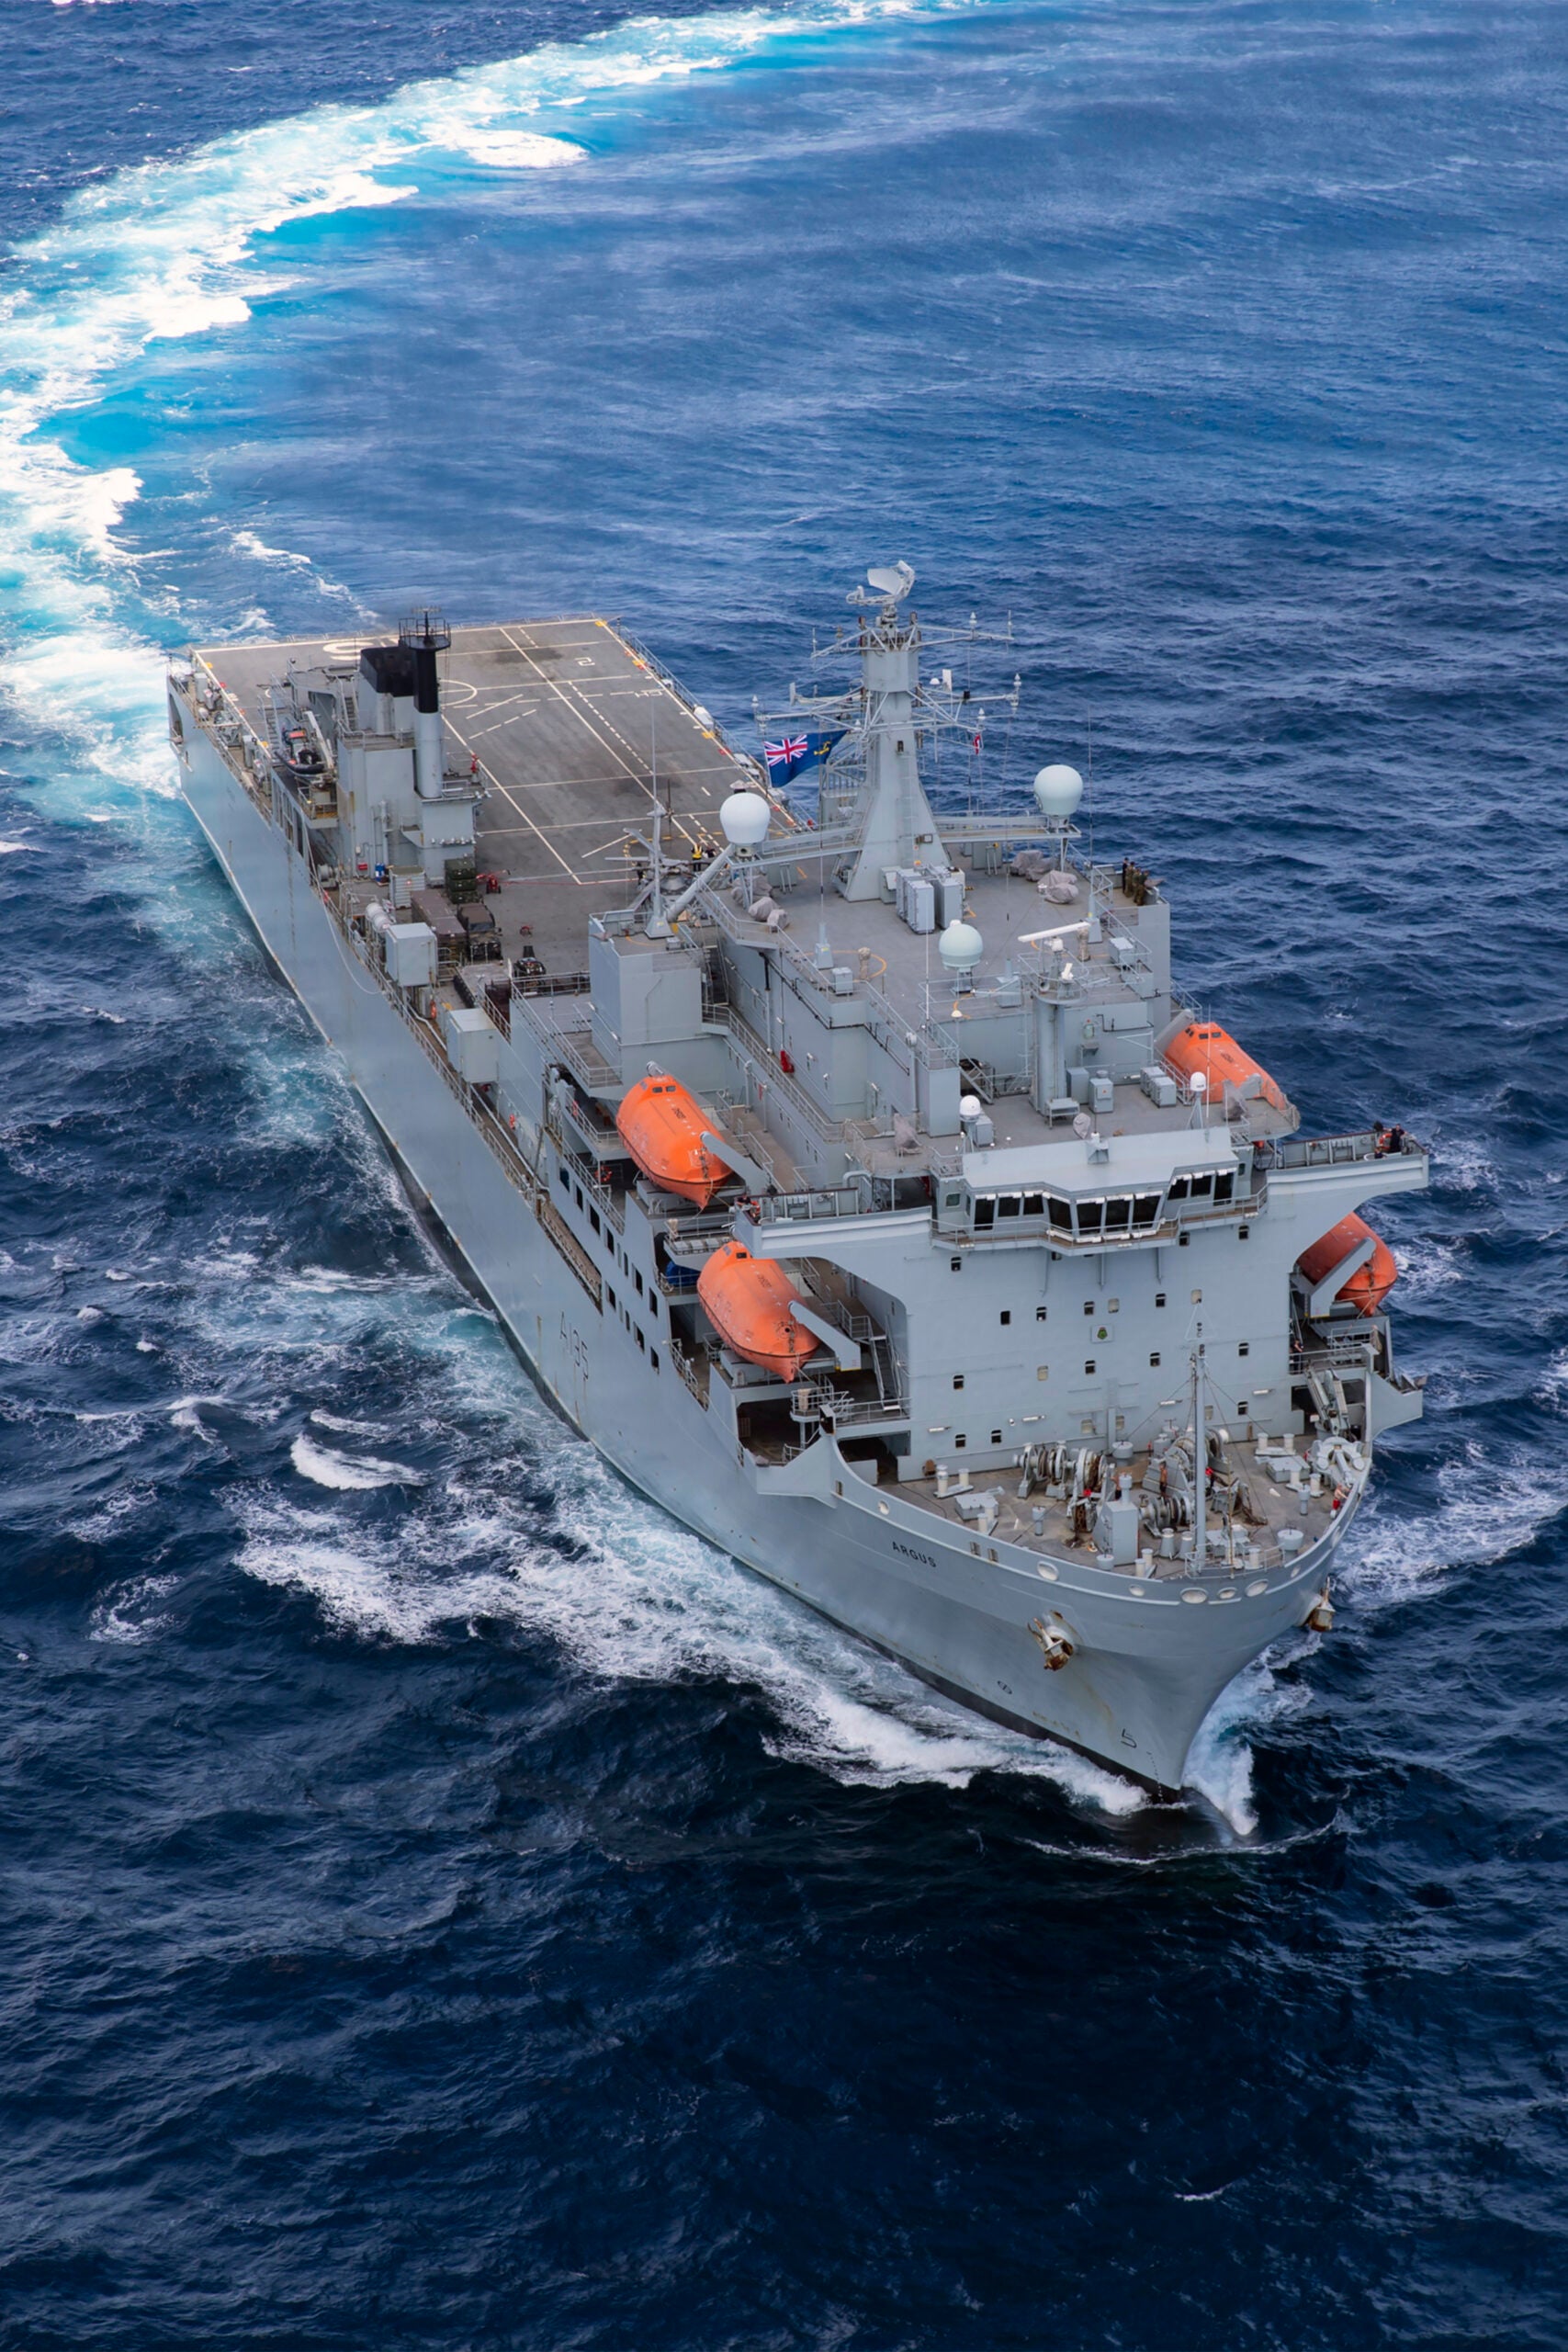 Pictured is RFA Argus in the Caribbean Sea, summer 2020.

The principal role of RFA Argus (A135) is to serve as a Primary Casualty Receiving Ship. She has a fully equipped 100-bed medical complex on board, which includes an emergency department, resuscitation and surgical facilities, and a radiology suite complete with a CT scanner.  
 
The personnel of RFA Argus boast more than 40 different medical and surgical specialities and are drawn from the MOD Hospital Units and Royal Marines Band Service.